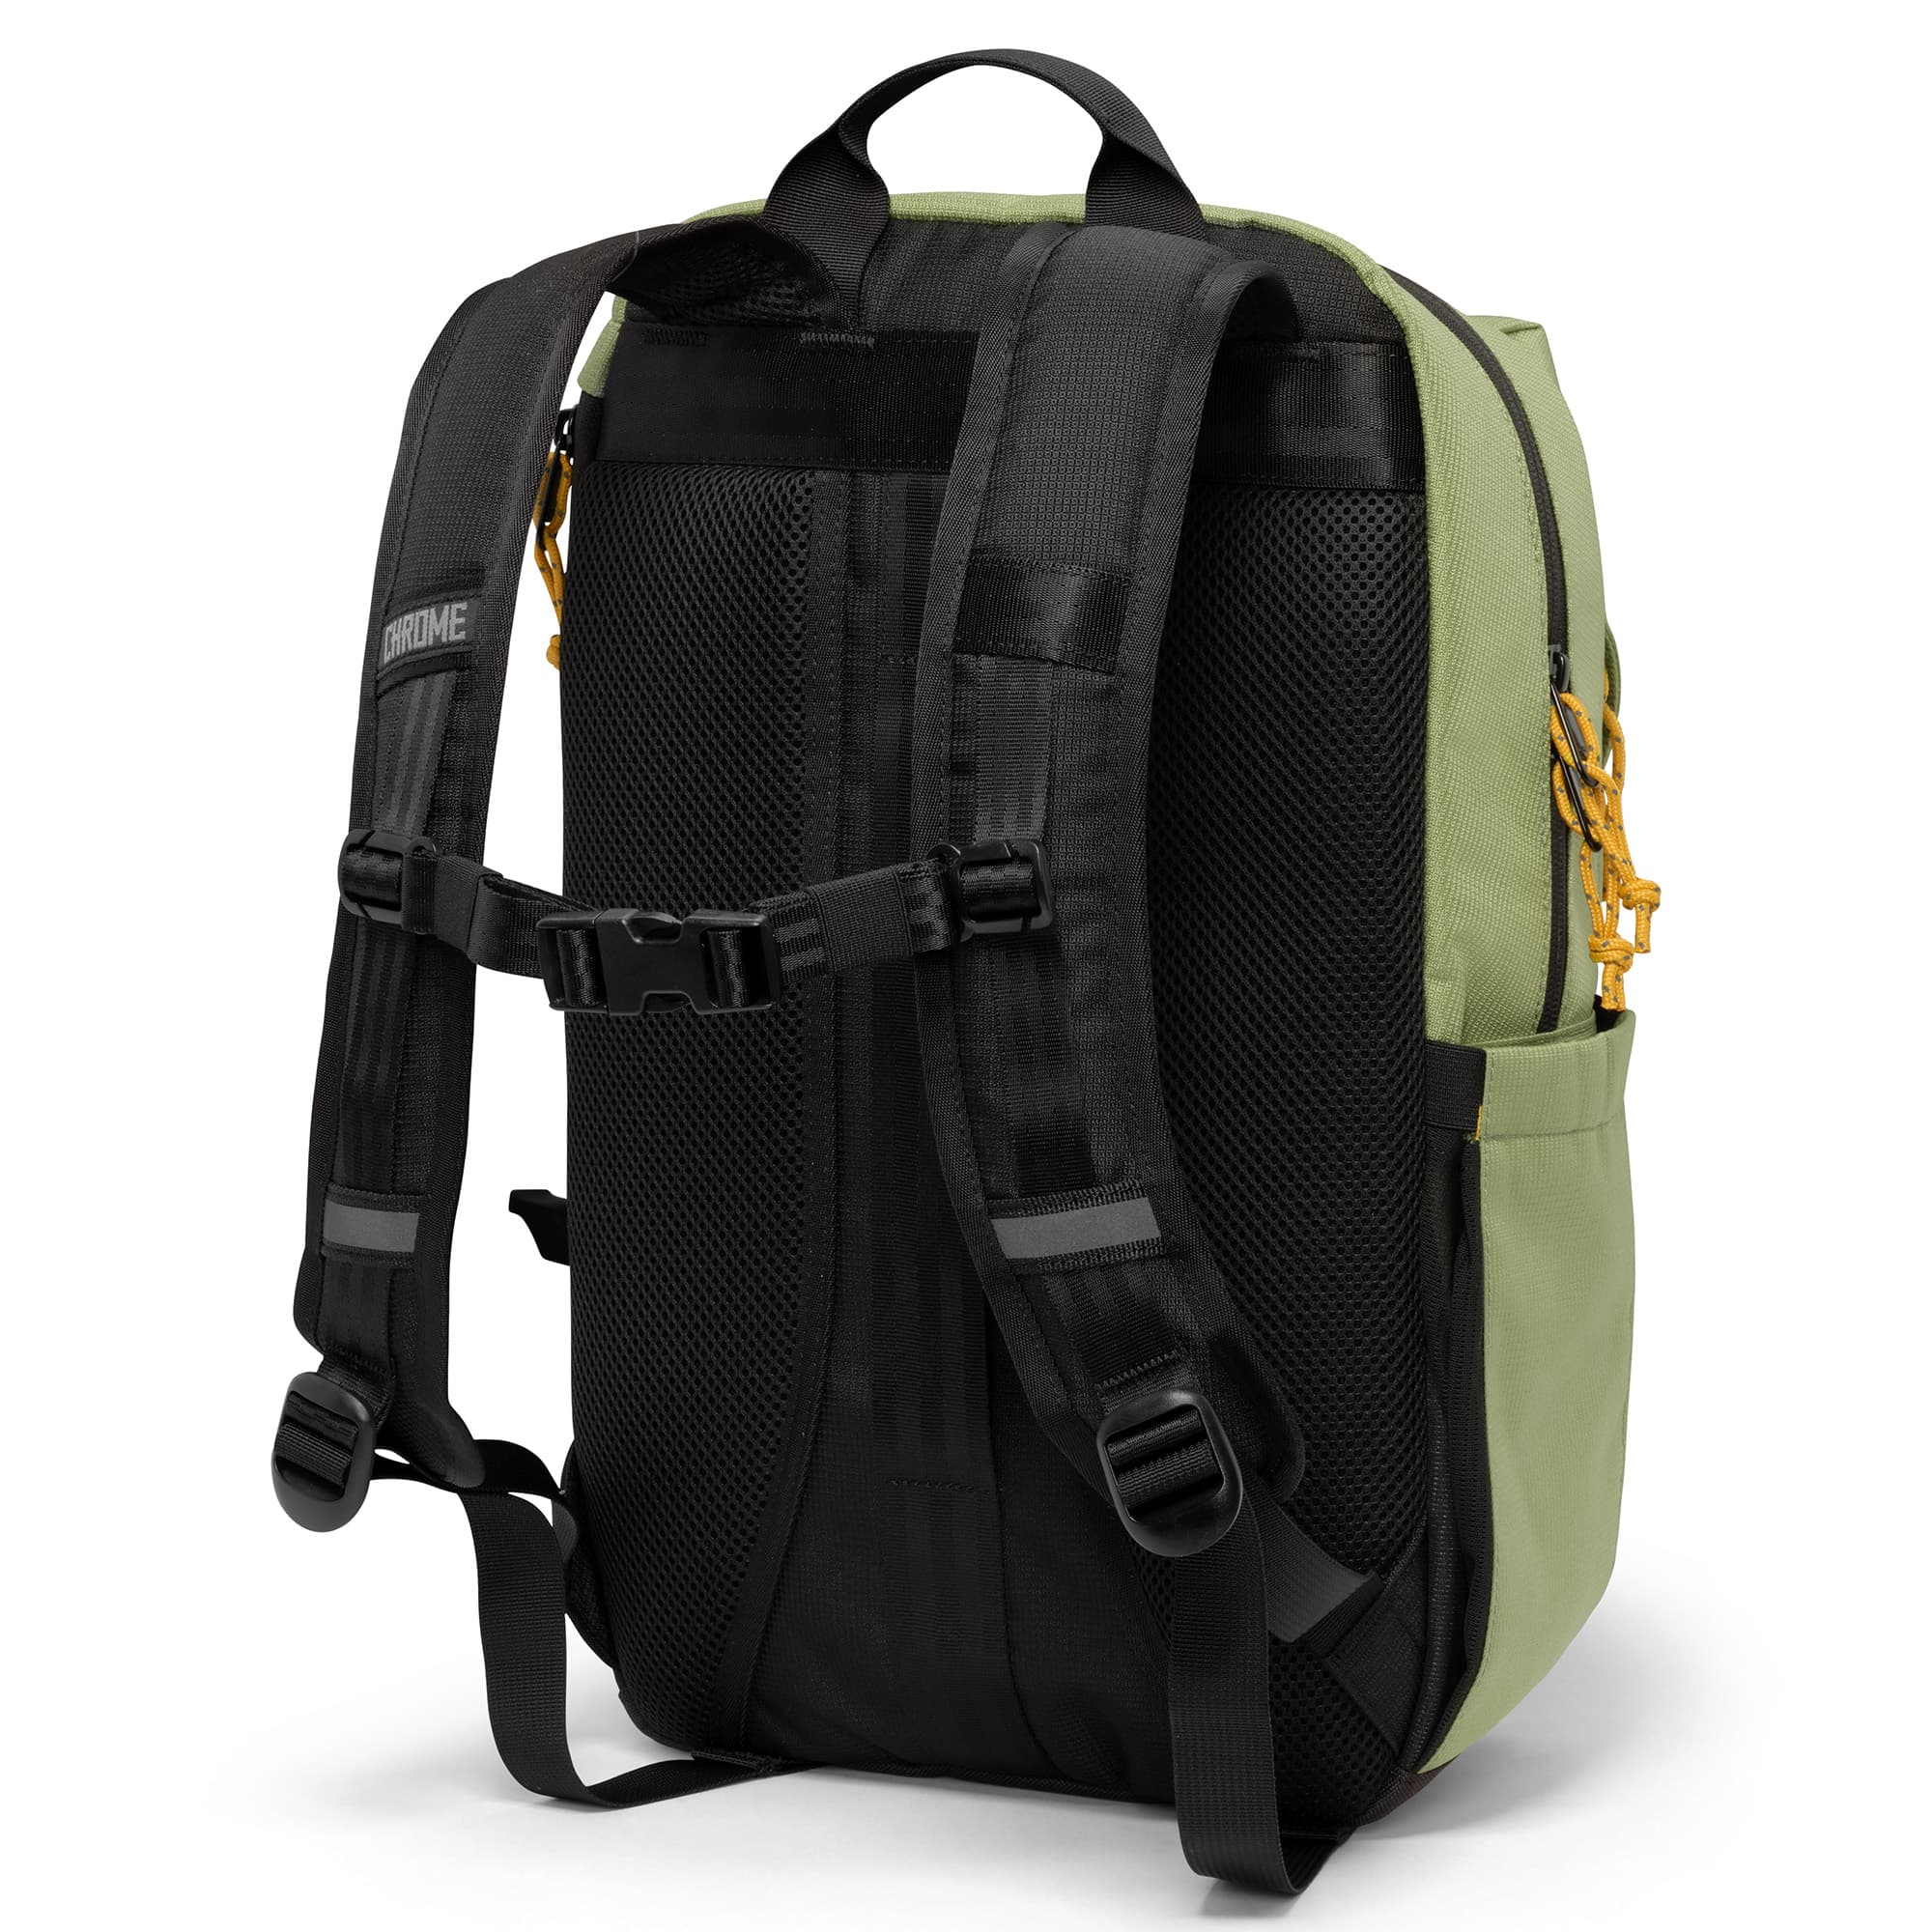 Ruckas 14L Backpack in green harness detail #color_oil green